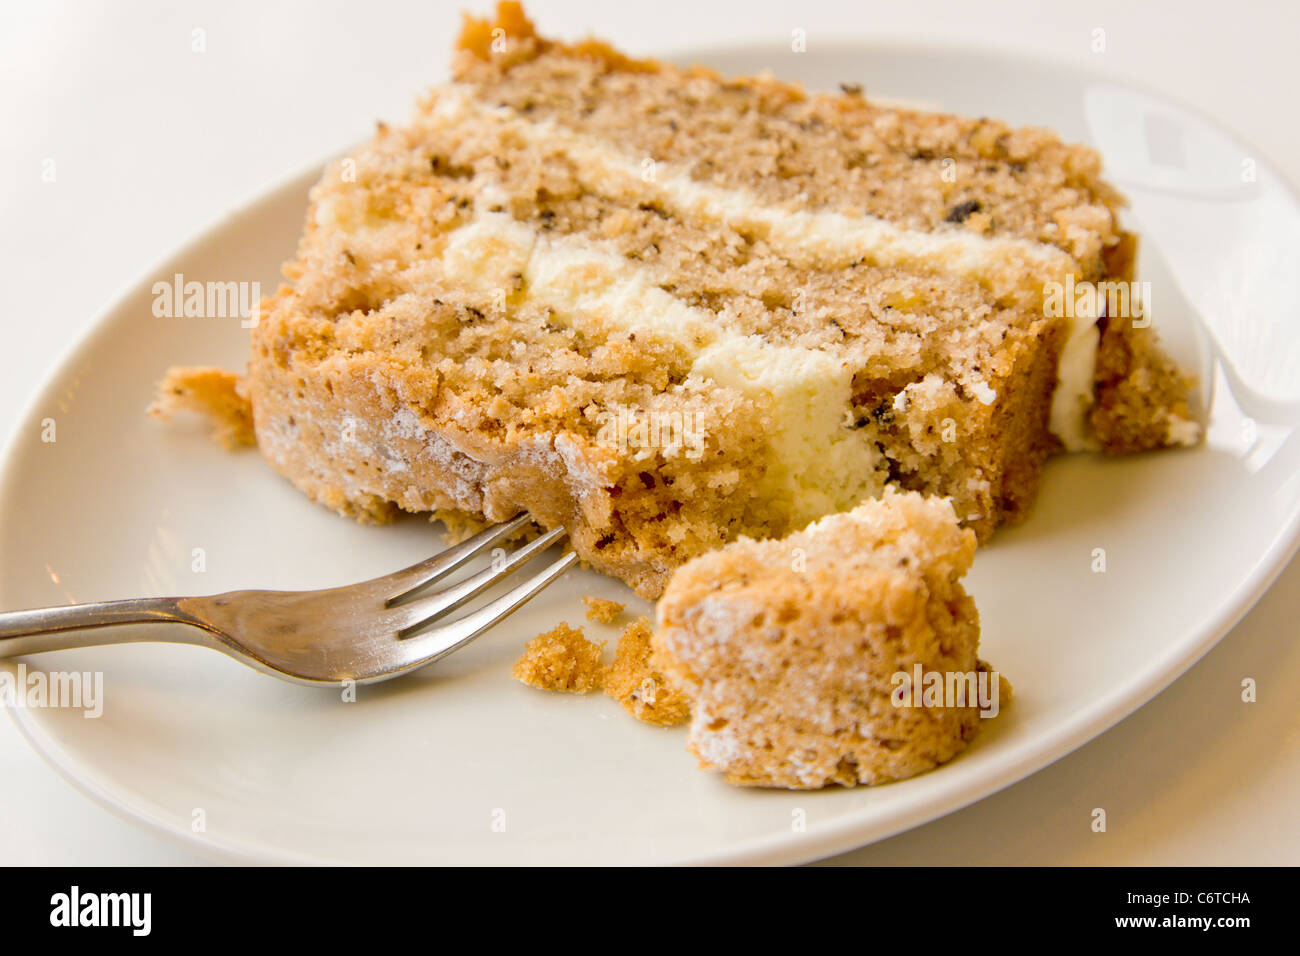 Walnut cake on plate Banque D'Images